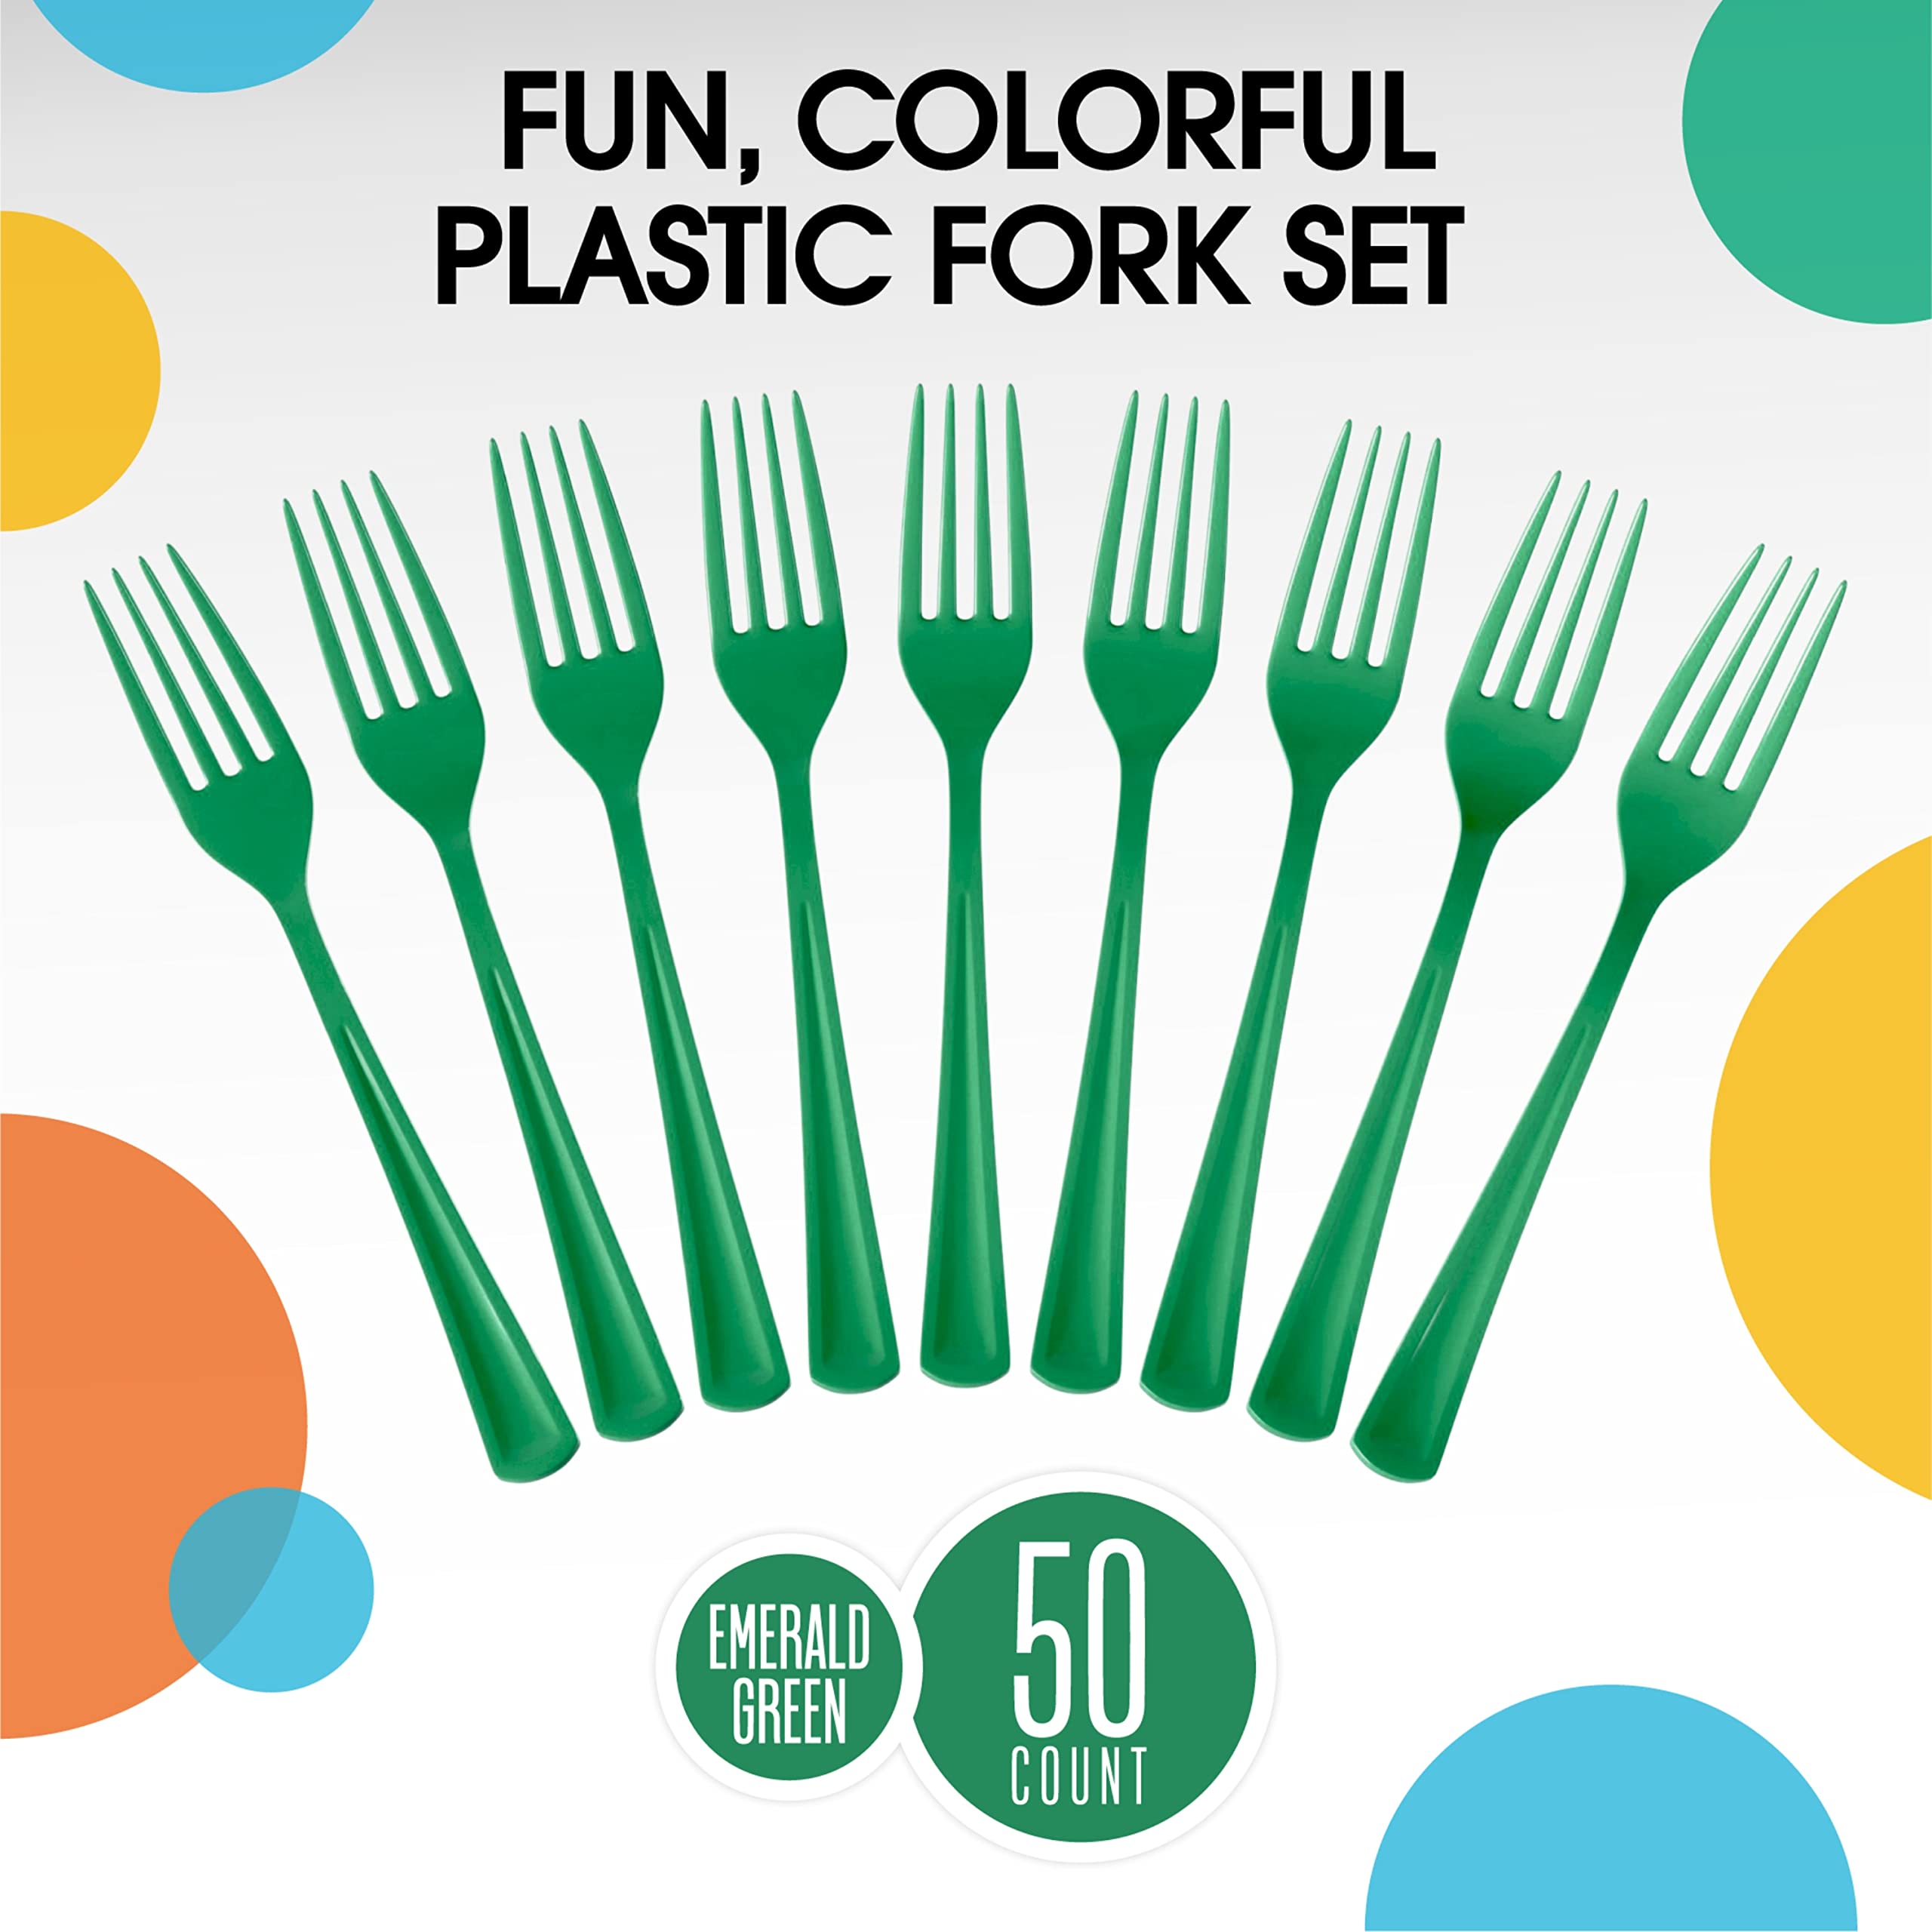 Heavy Duty Emerald Green Plastic Forks | 50 Count